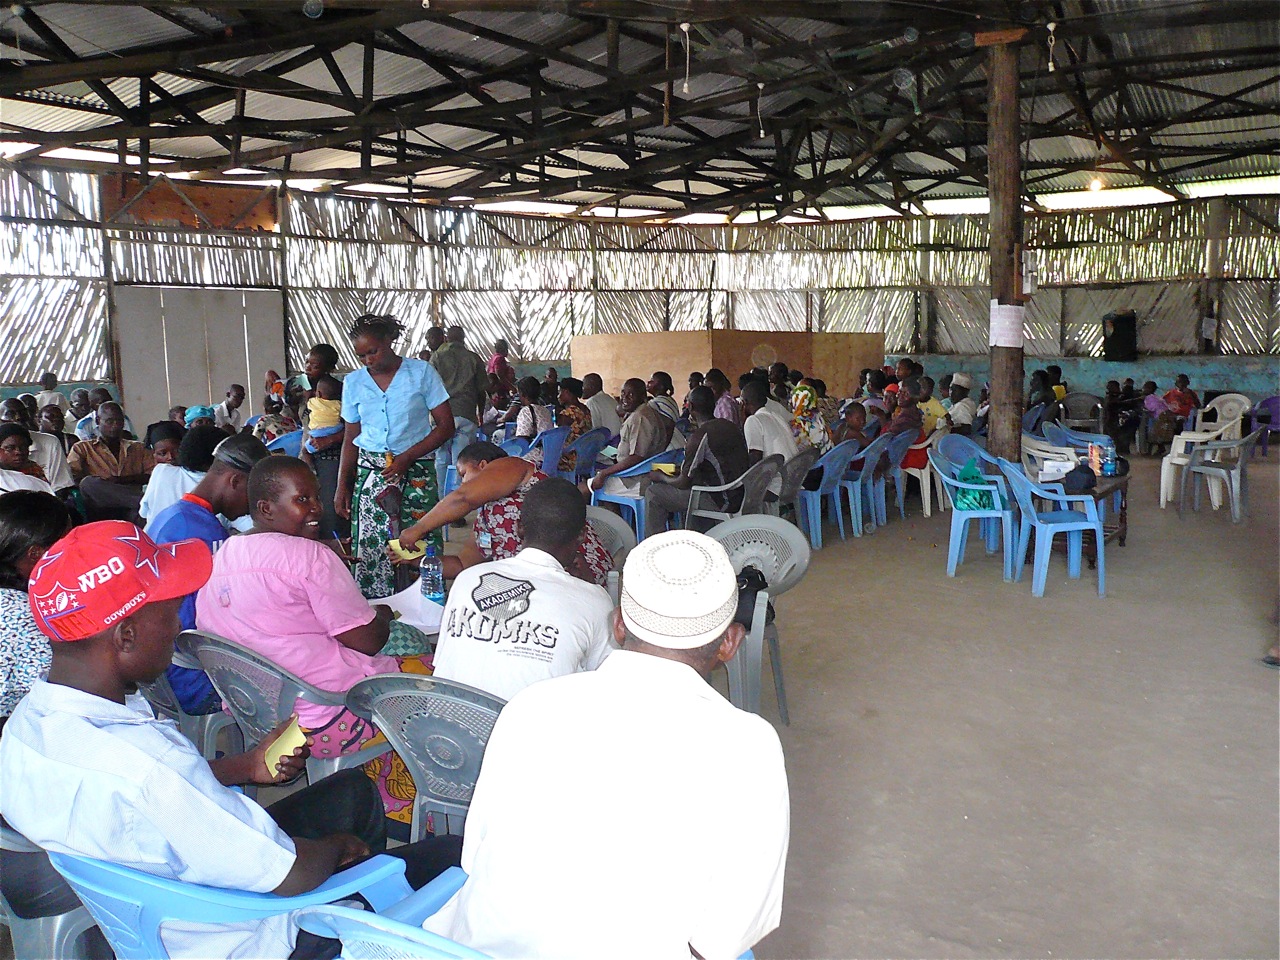 People waiting for treatment at one of the churches where the Medical Camp was hosted